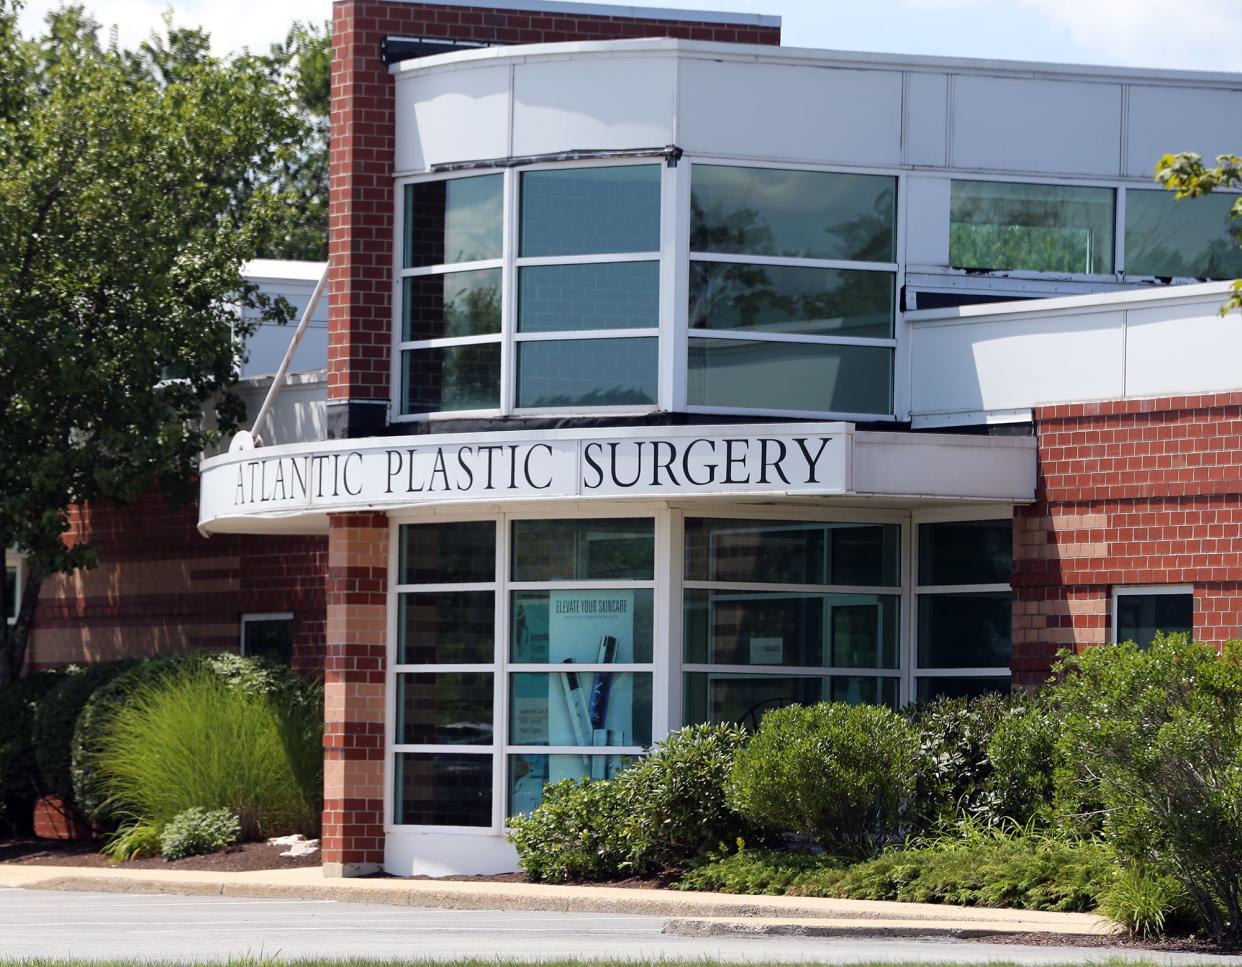 Dr. Lawrence Gray and his Portsmouth business Atlantic Plastic Surgery & Medi-Spa have been named as co-defendants in two lawsuits filed by former patients.